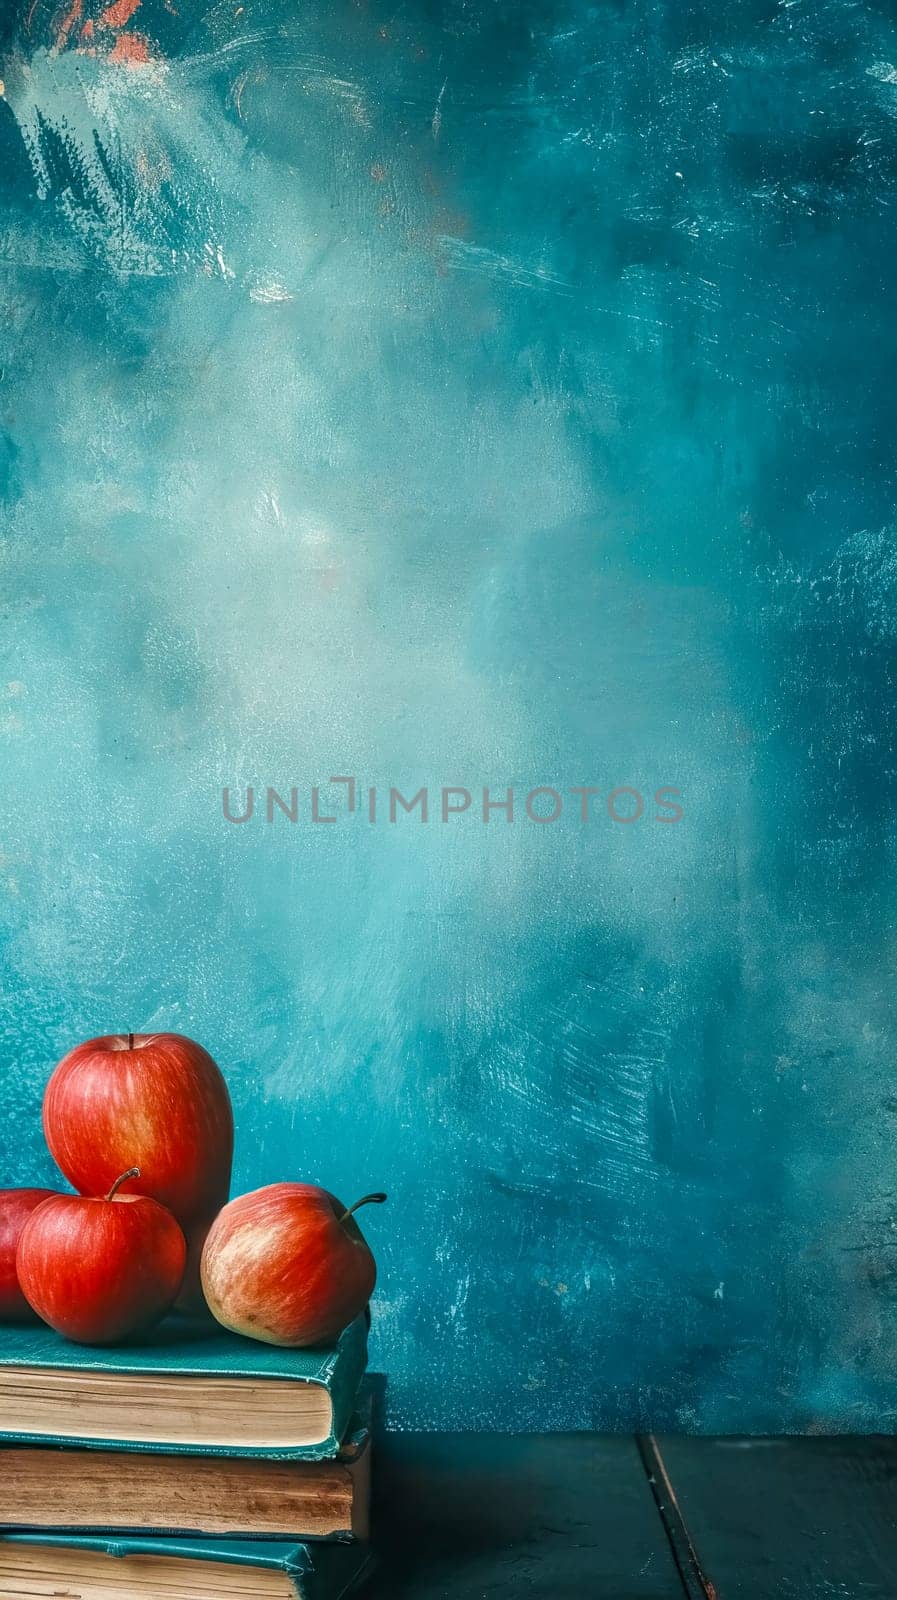 books with three red apples on top, set against a textured turquoise backdrop with space for text, evoking themes of education and knowledge. by Edophoto